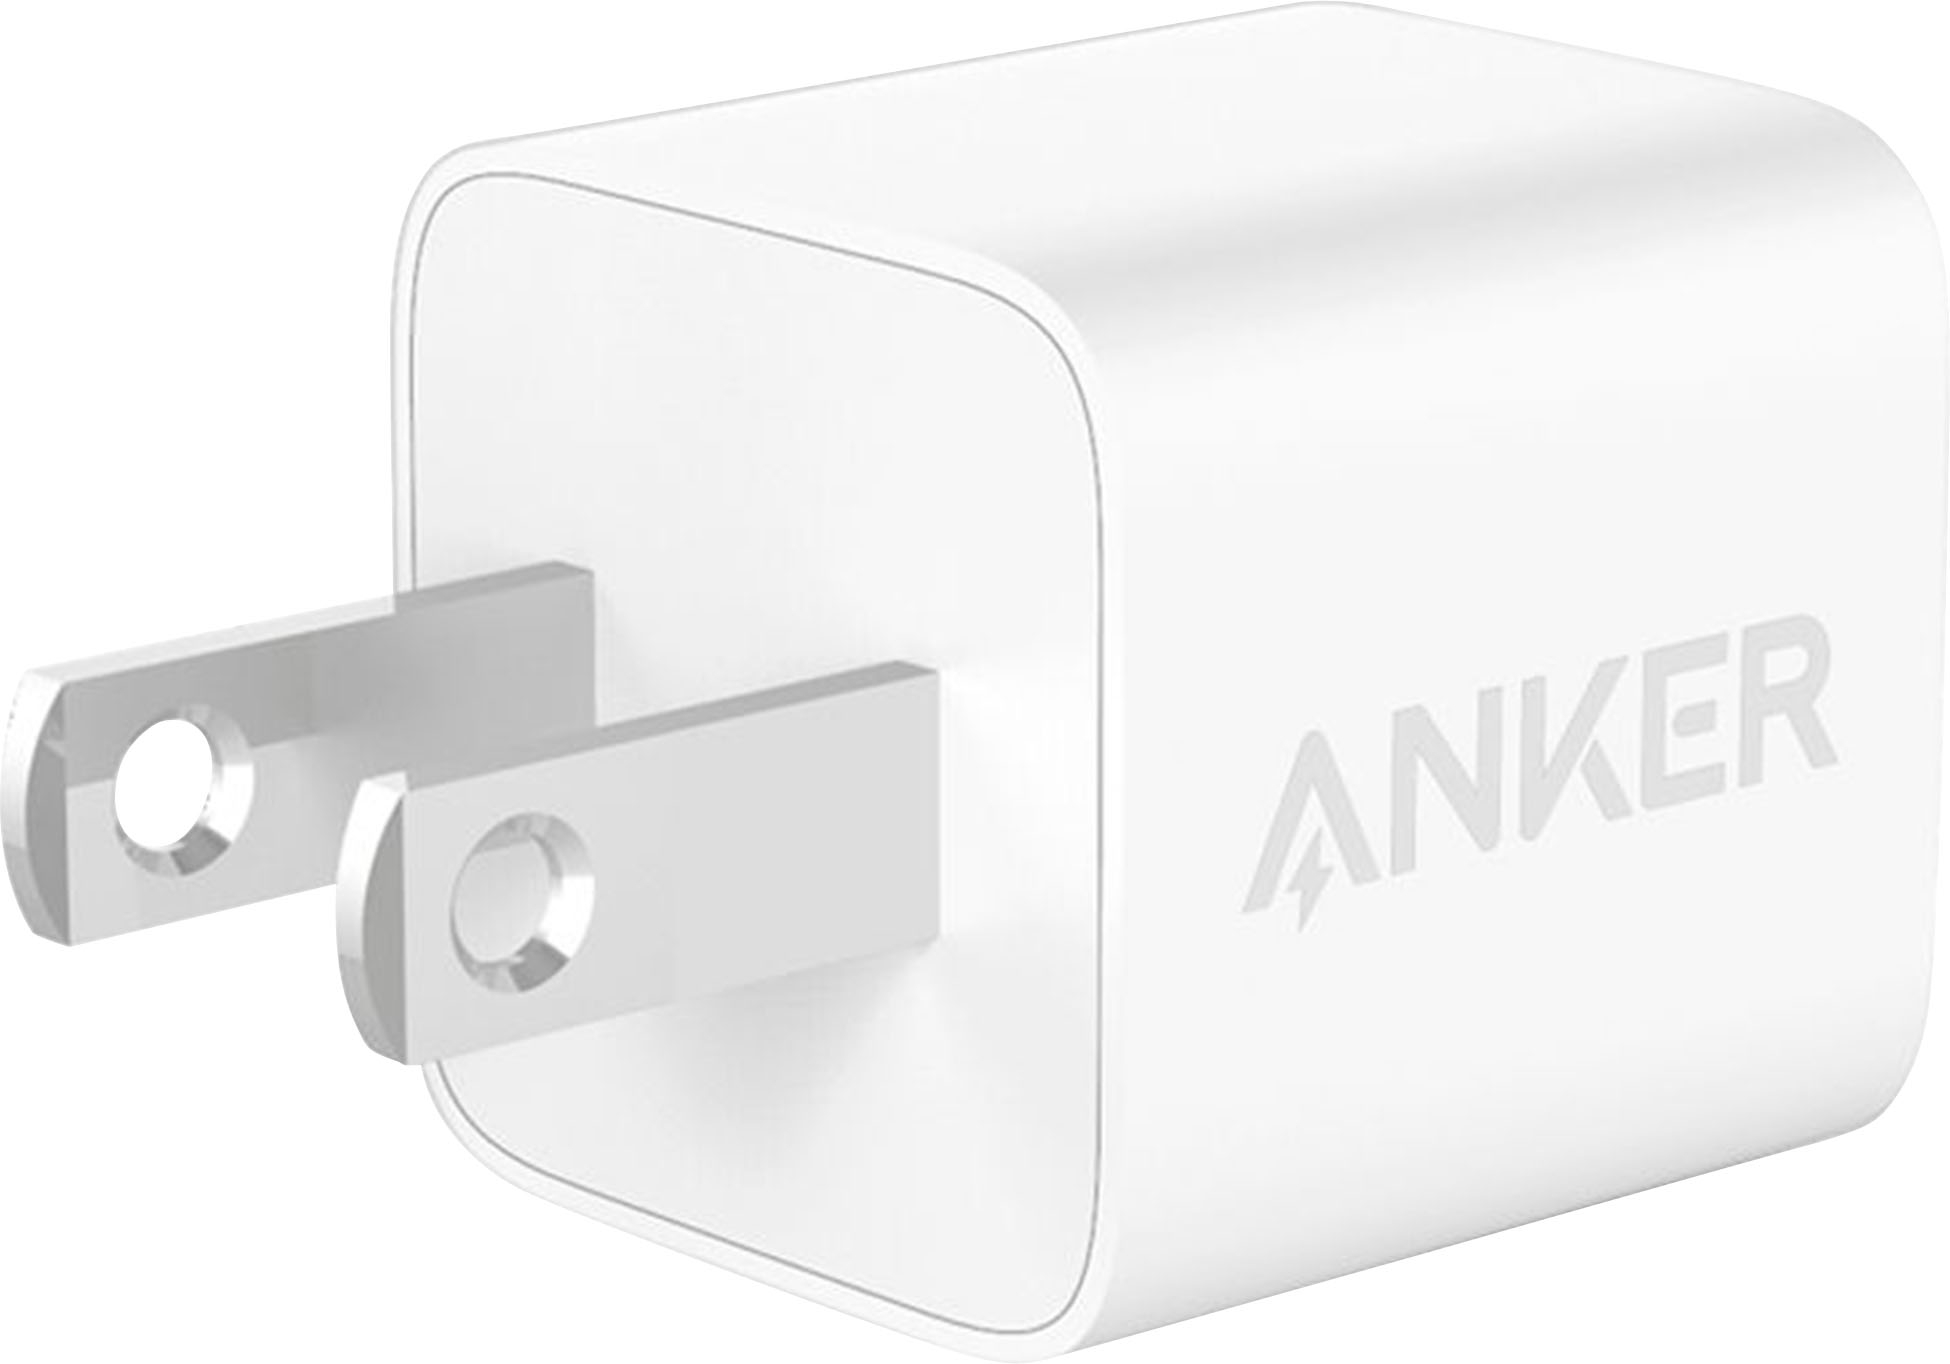 Anker Powerport PD Nano 20W High Speed USB-C Fast Wall Charger for iPhone  or Samsung White A2634J23-2 - Best Buy